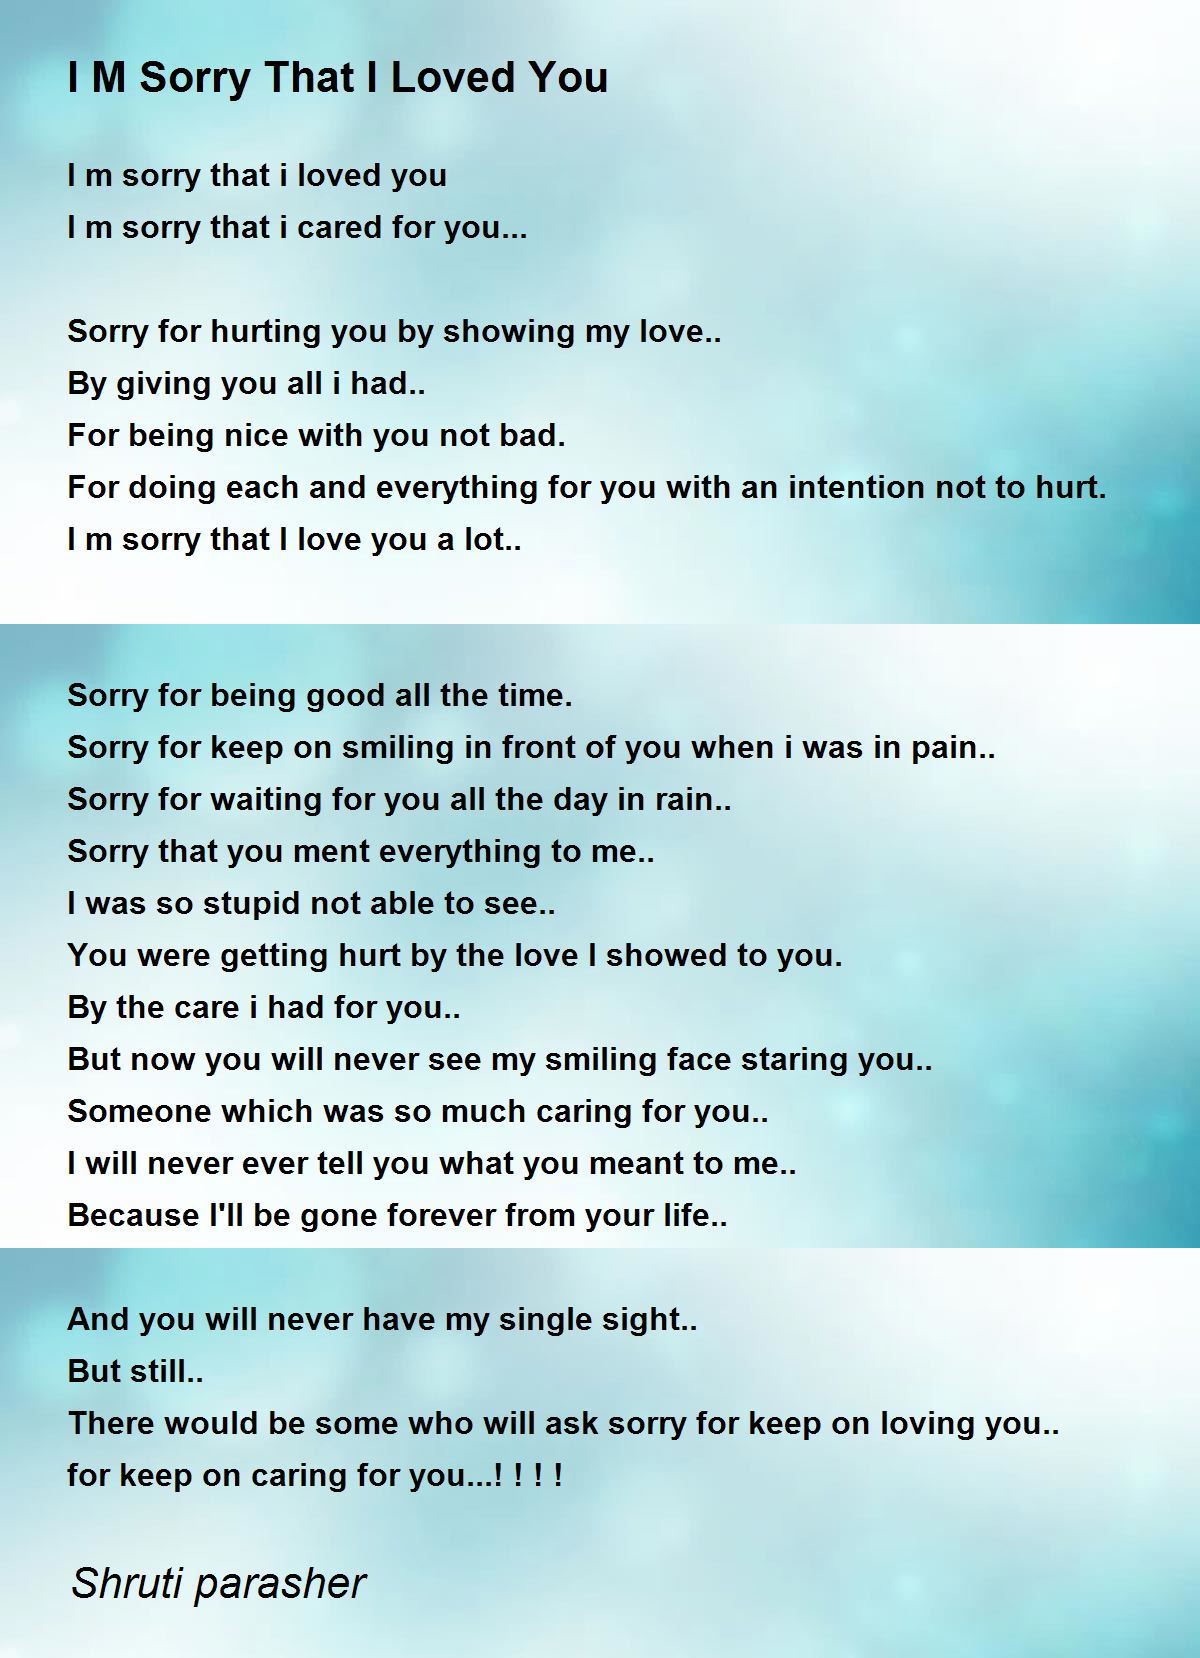 I M Sorry That I Loved You By Shruti Parasher I M Sorry That I Loved You Poem